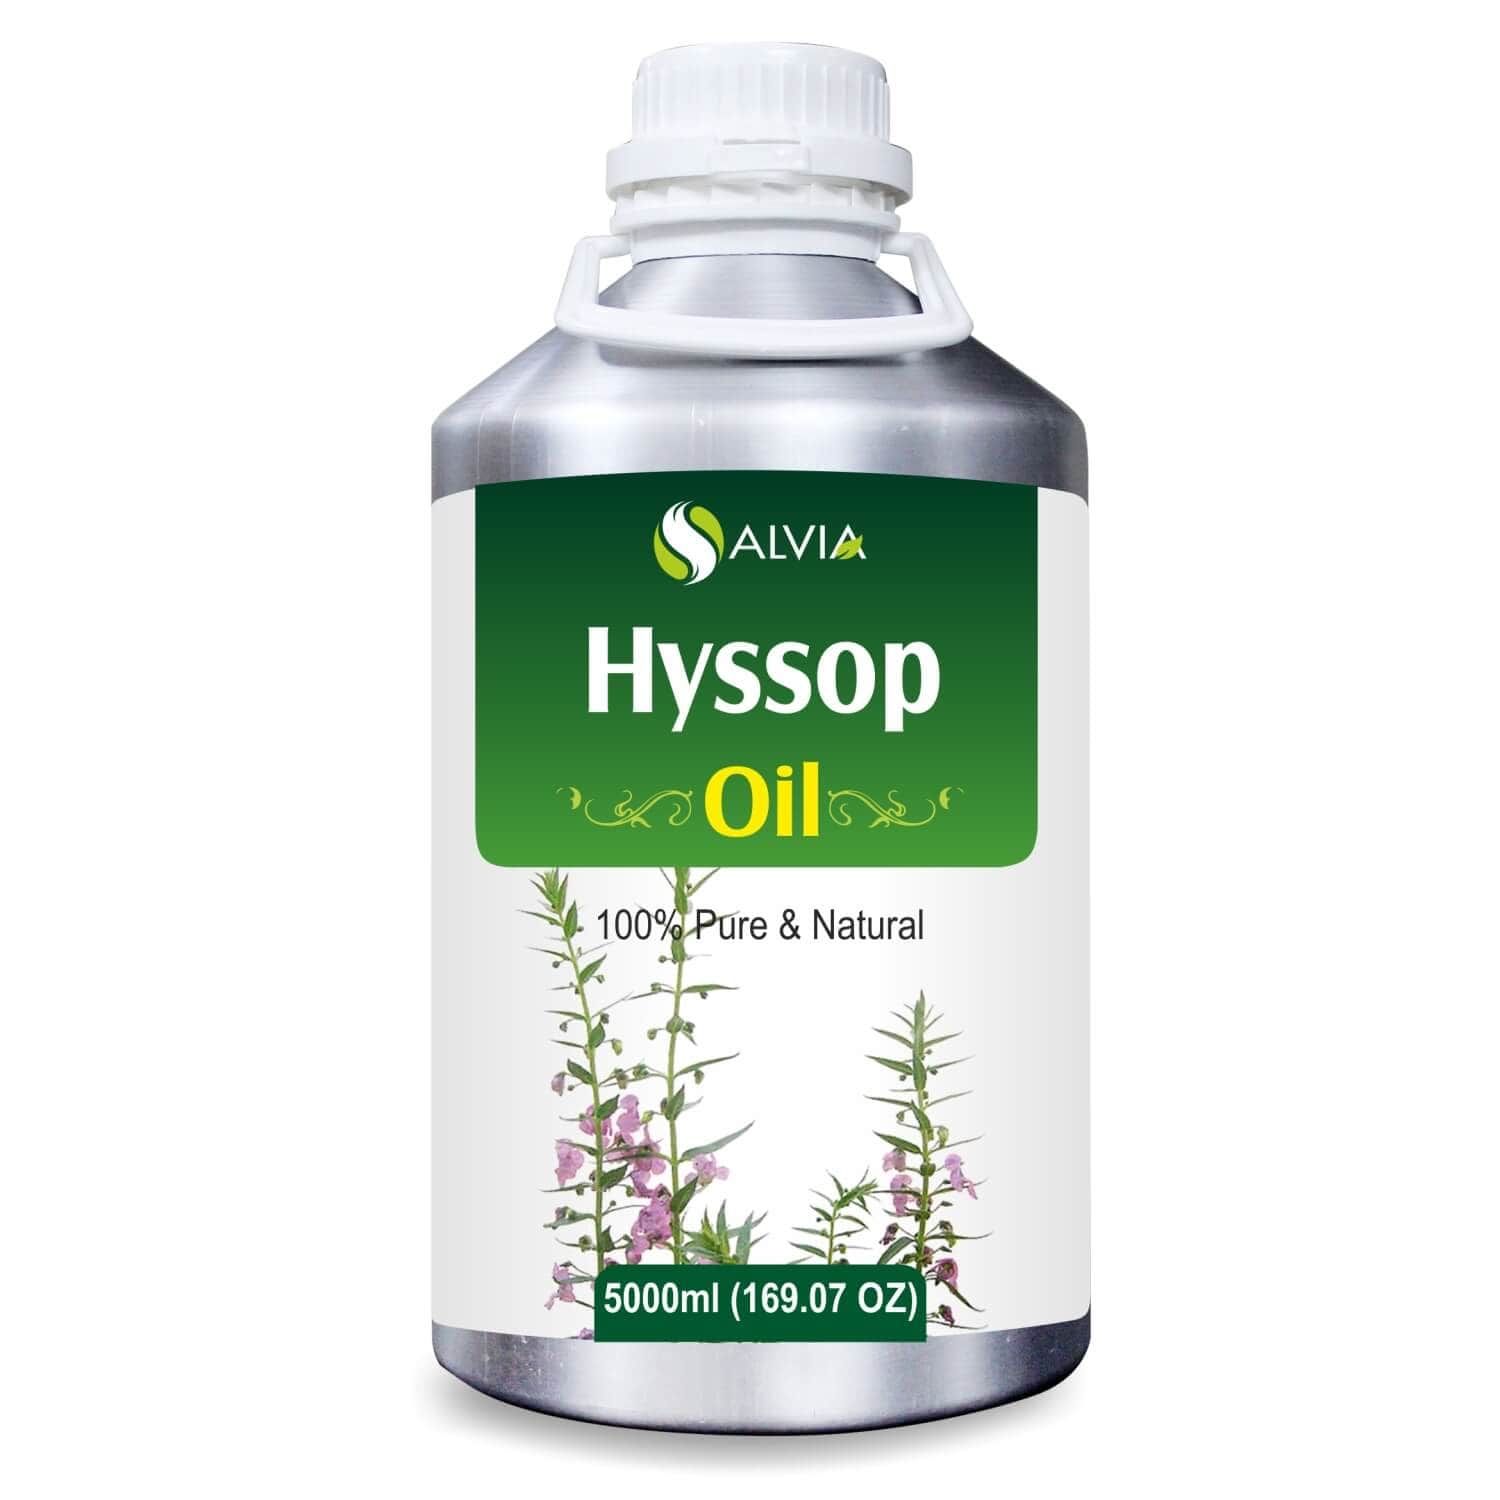 Salvia Natural Essential Oils 5000ml Hyssop Oil (Hyssopus Officinalis) Pure Natural Essential Oil Prevents Hair Loss, Soothes Mild Skin Condition, Reduces Muscle Spasms